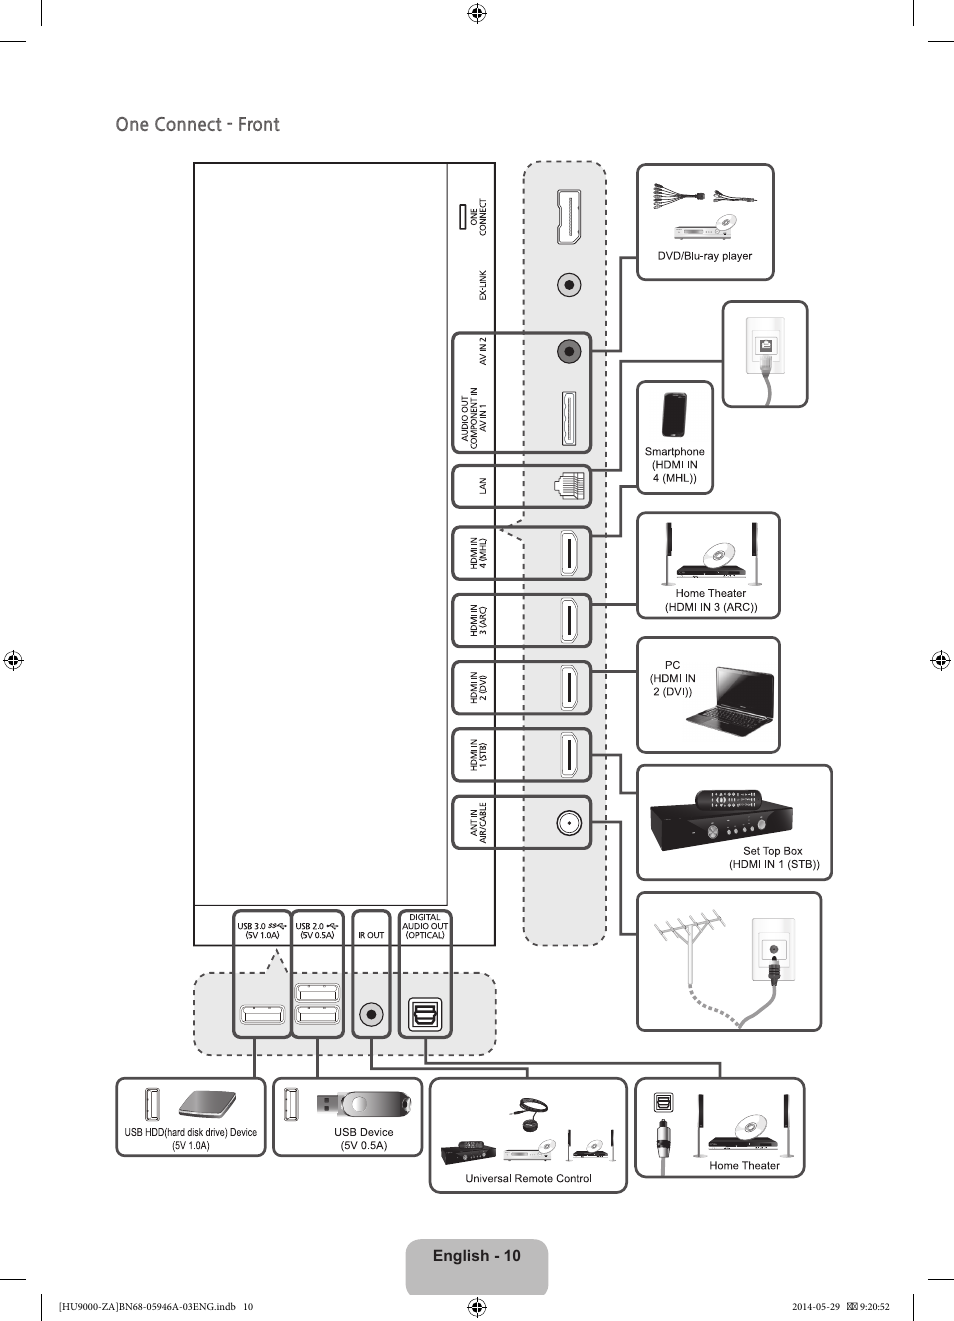 One connect - front | Samsung UN55HU9000FXZA User Manual | Page 10 / 43